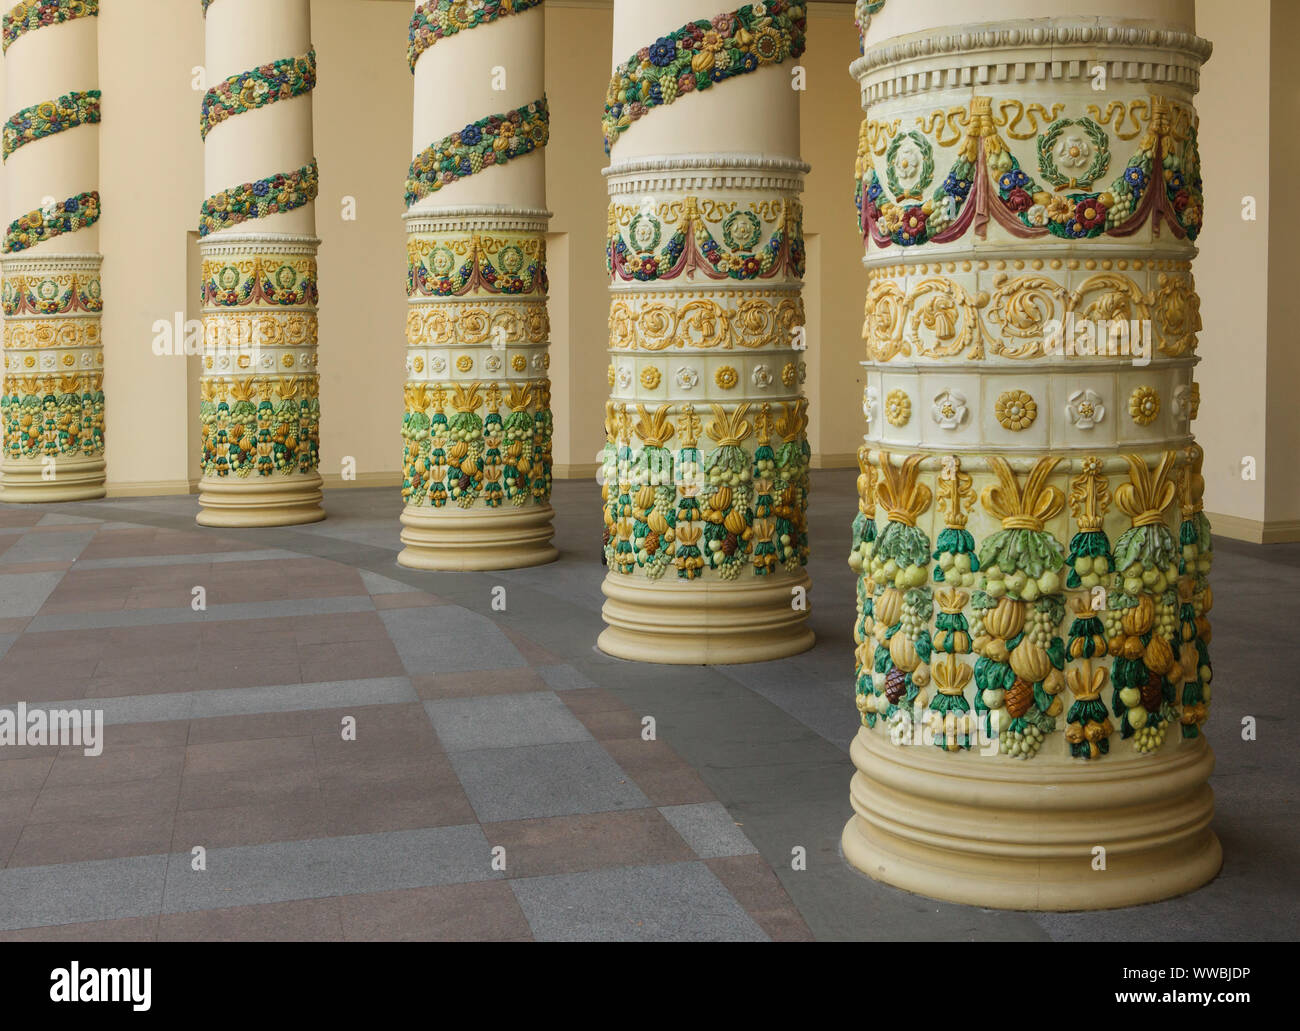 Glazed majolica columns at the main entrance to the Byelorussia Pavilion (Belarus Pavilion) in the VDNH exhibition ground (Exhibition of Achievements of National Economy) in Moscow, Russia. The exhibition pavilion designed by Soviet architects Grigory Zakharov and Zinaida Chernysheva was built in 1954. It was also used later as the Electrical Technology Pavilion. Stock Photo